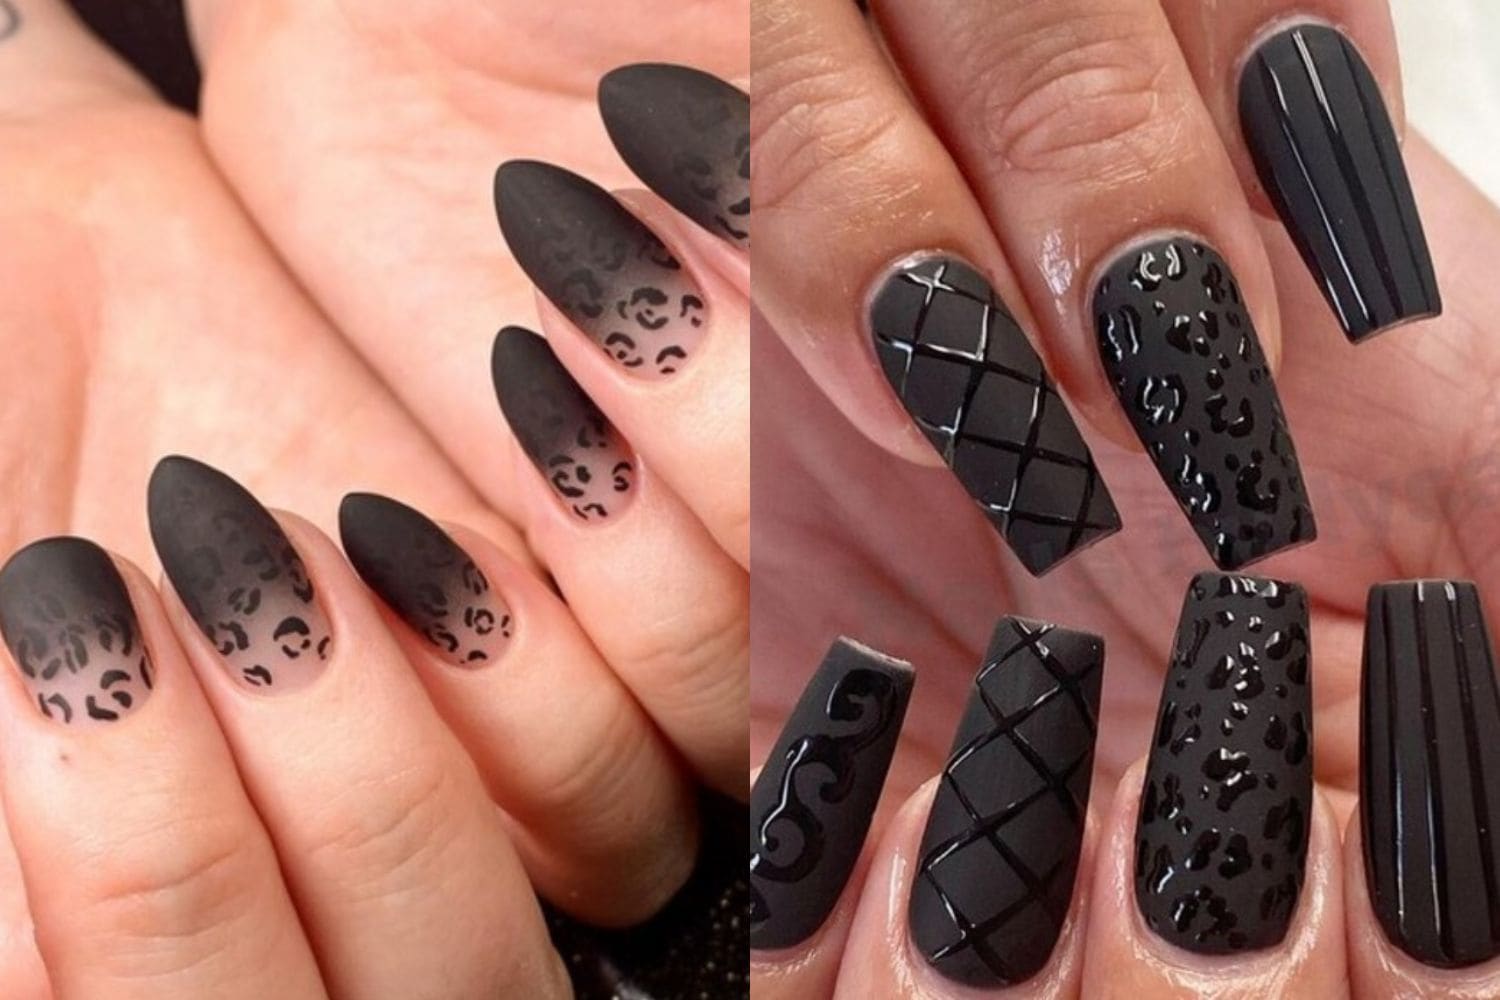 56 Stylish Black and Silver Nail Designs for 2023 - Nerd About Town